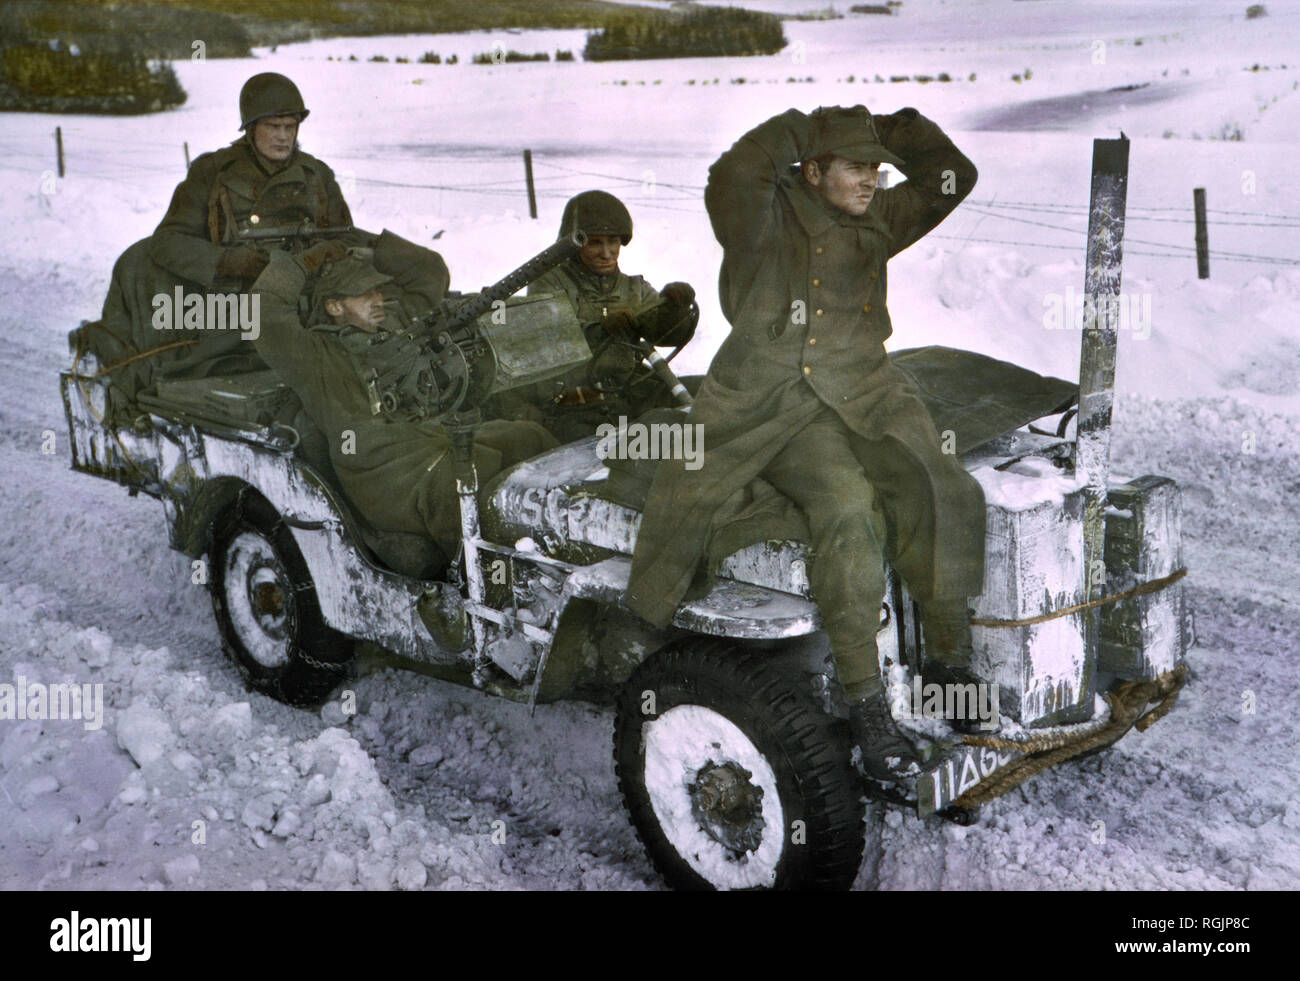 Two German Prisoners Being Brought in, Ardennes-Alsace Campaign, Battle of the Bulge, 1945 Stock Photo